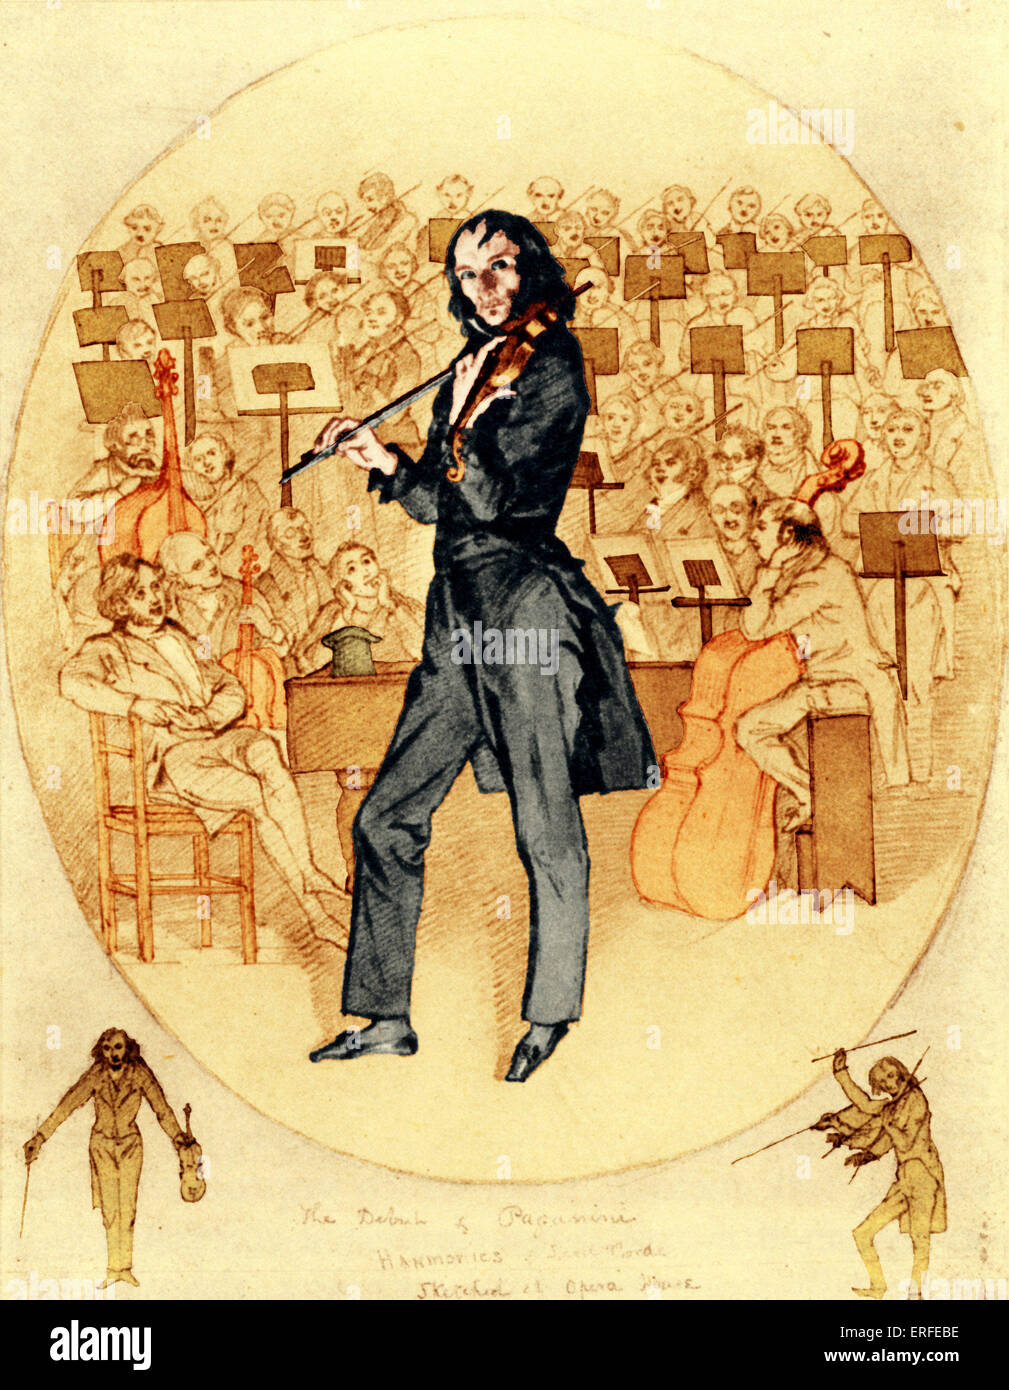 Niccolo Paganini playing the violin in front of an orchestra.        Italian violinist and composer (1782-1840). Stock Photo